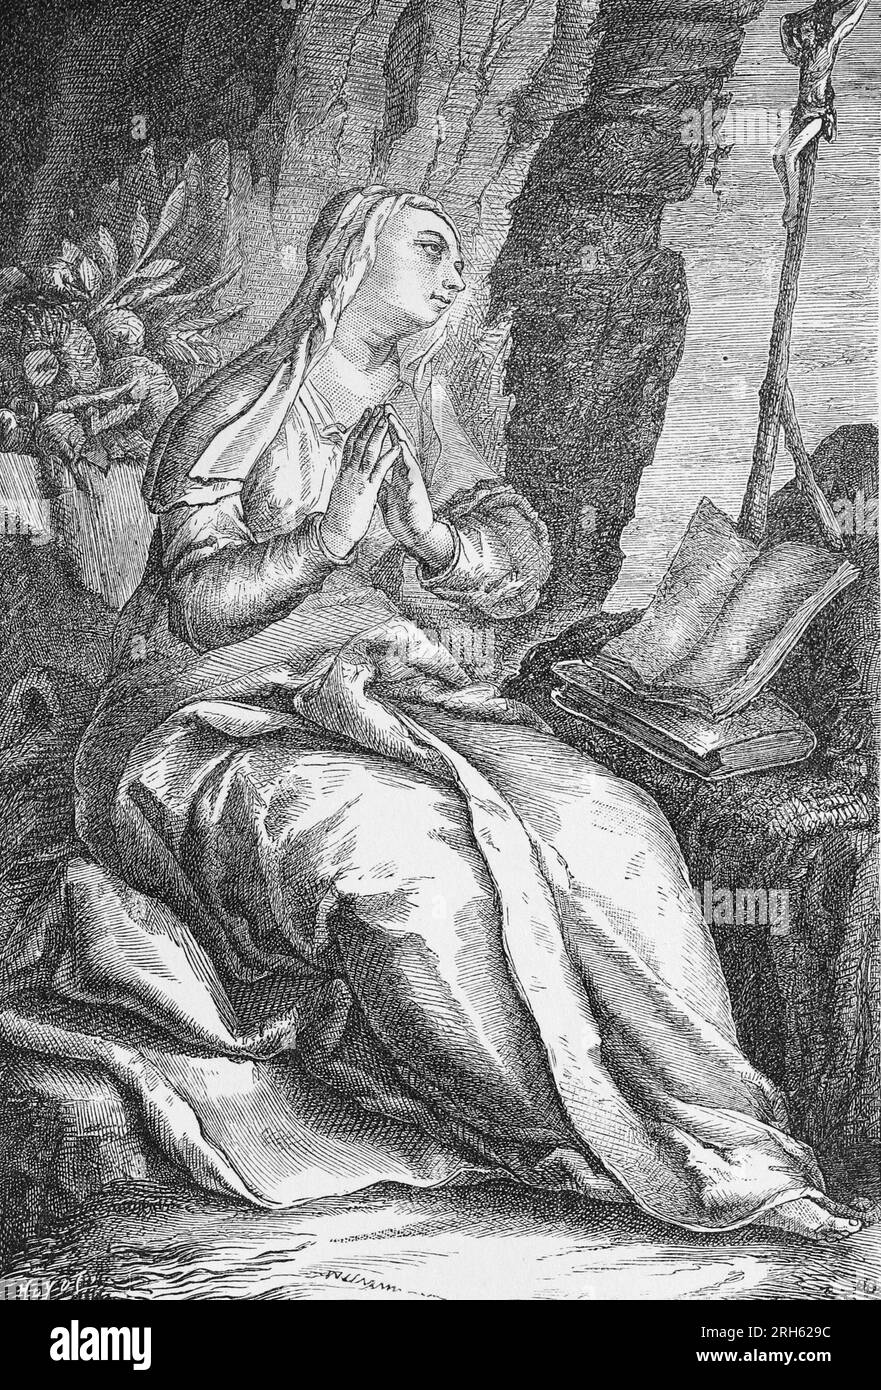 Saint Marcella. Engraving from Lives of the Saints by Sabin Baring-Gould. Stock Photo